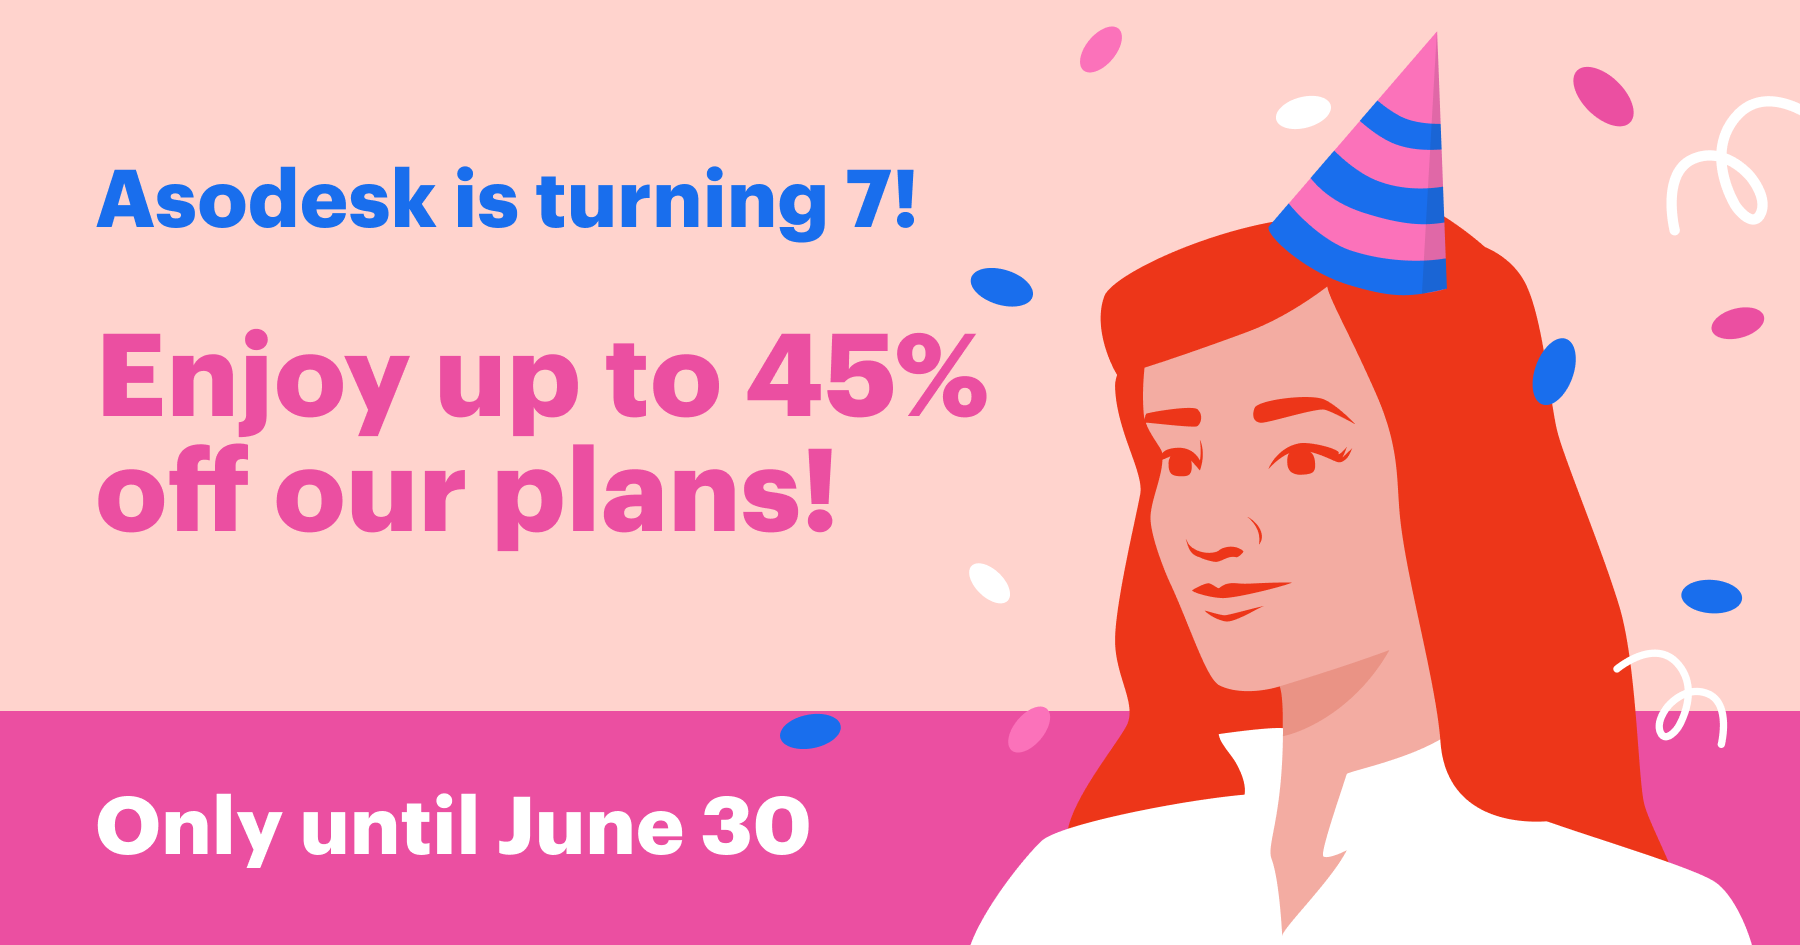 Asodesk gives up to 45% off on its birthday